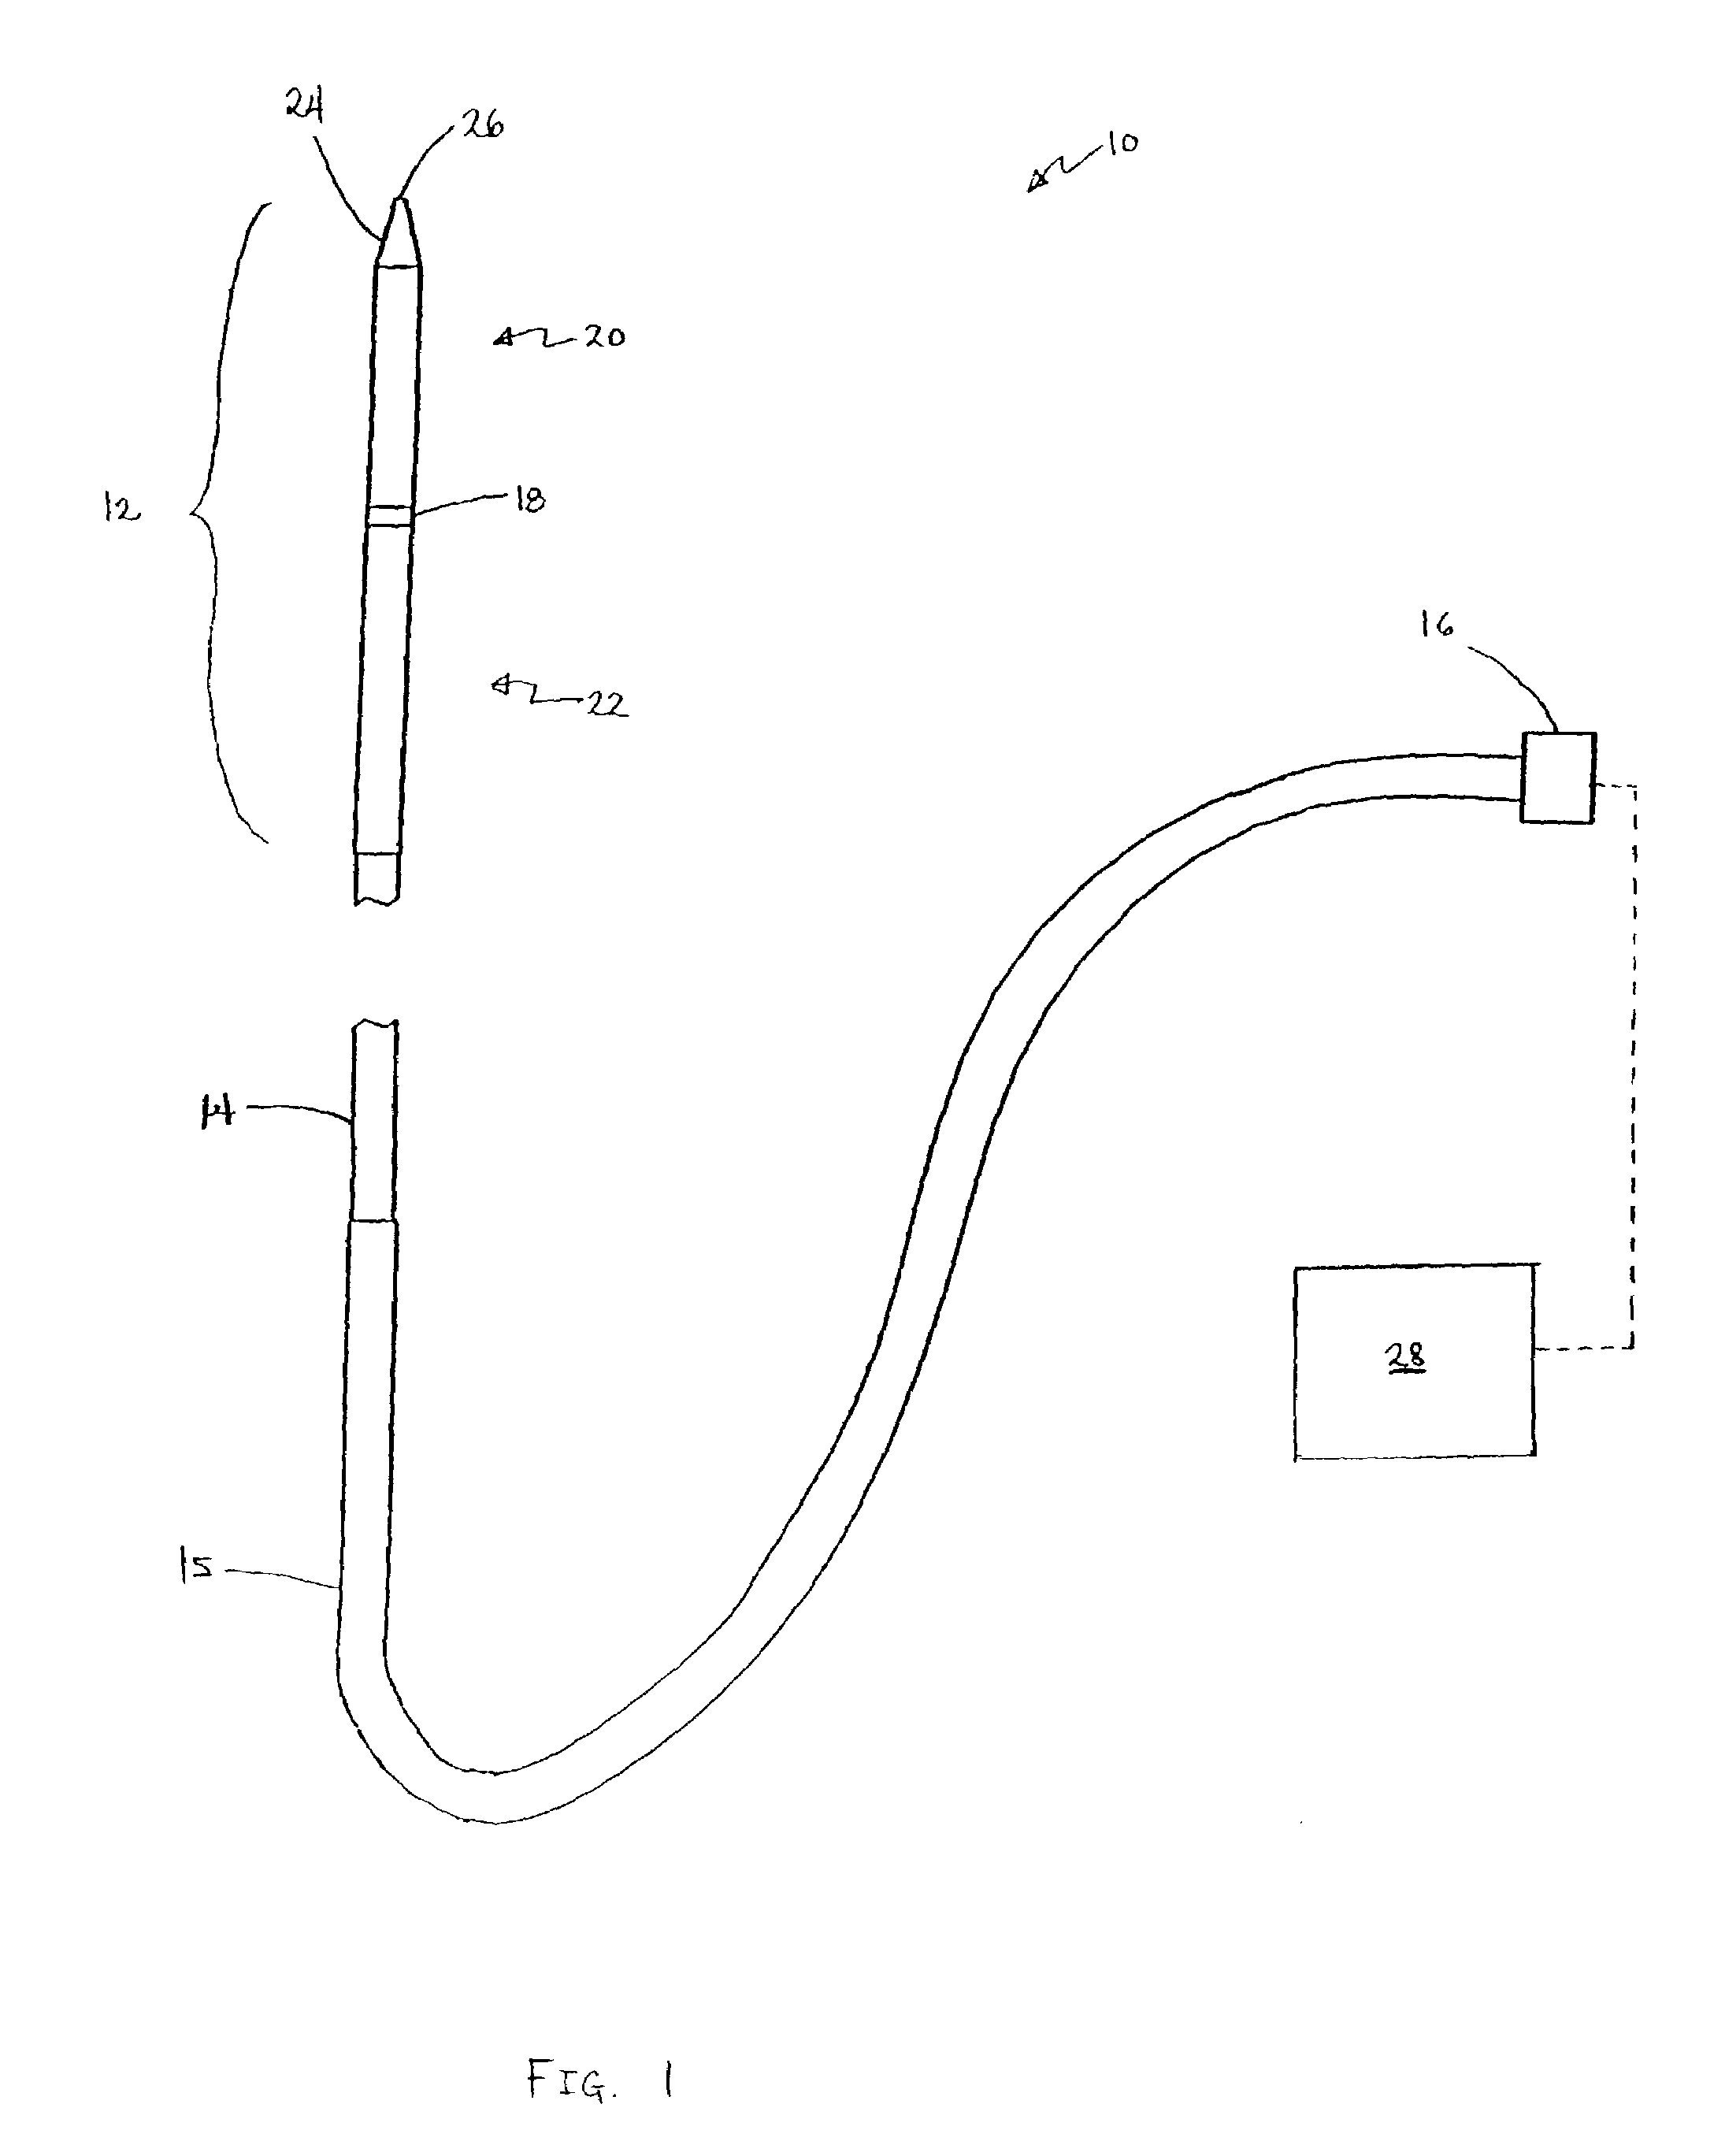 High-strength microwave antenna assemblies and methods of use